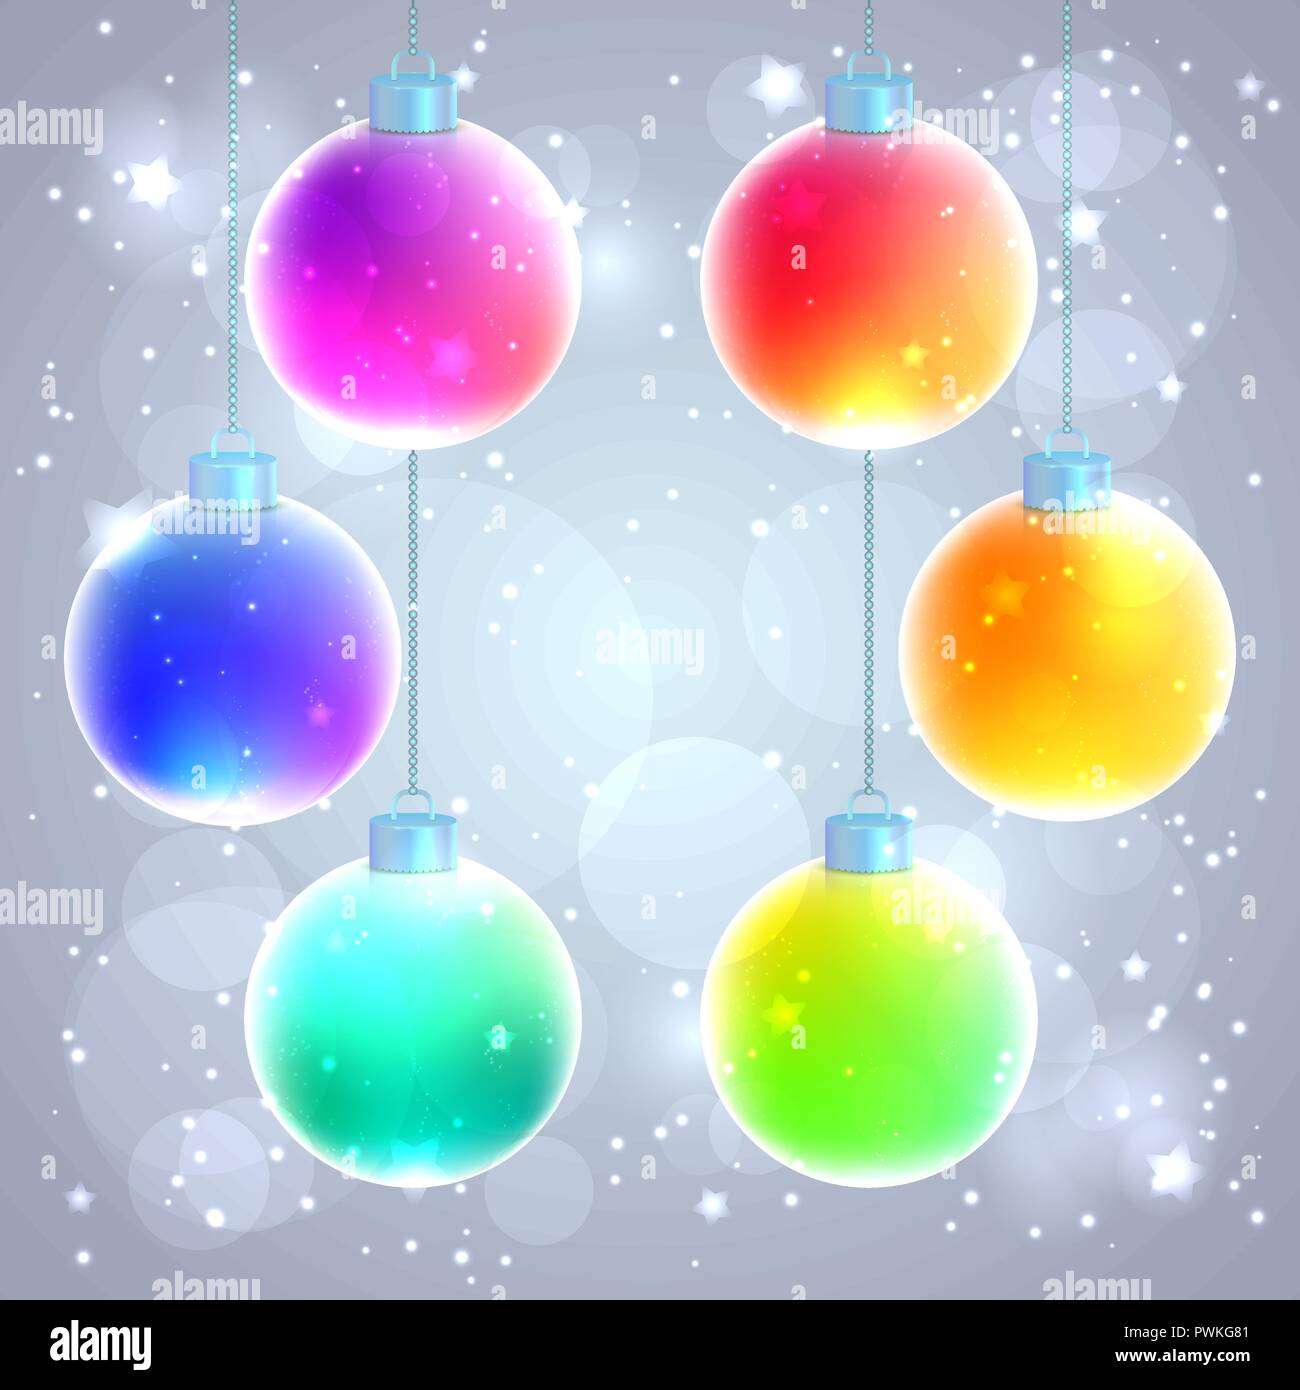 Set of six colorful rainbow Christmas balls on sparkled background Stock Vector